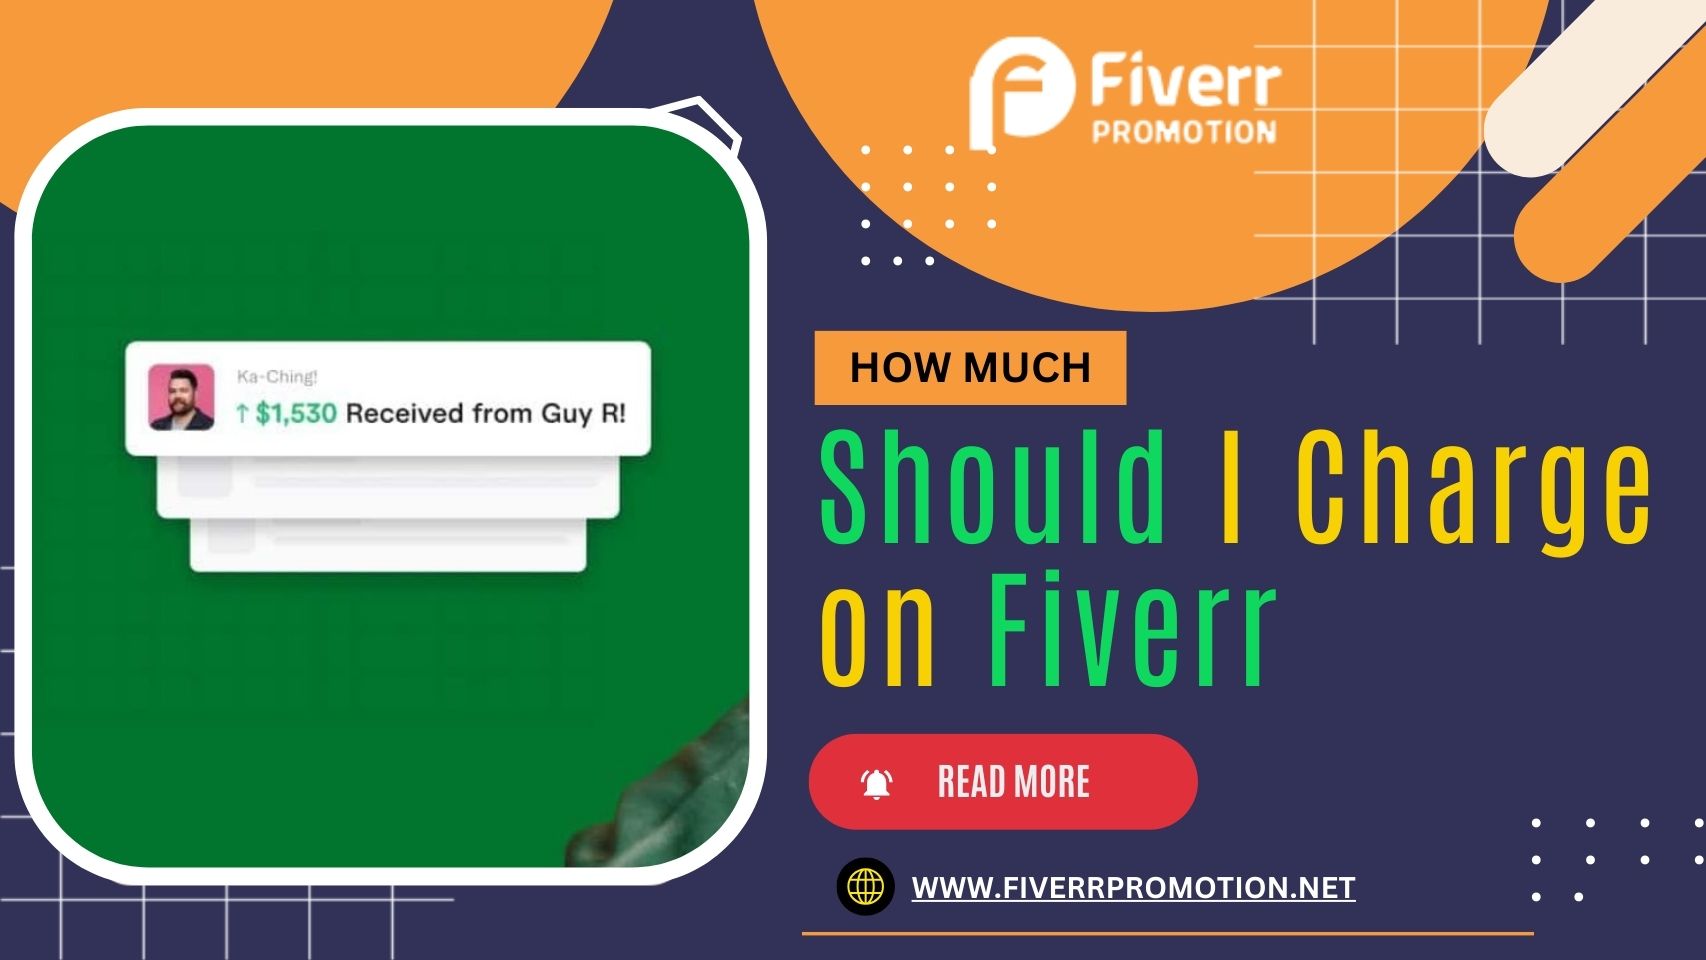 How Much Should I Charge on Fiverr